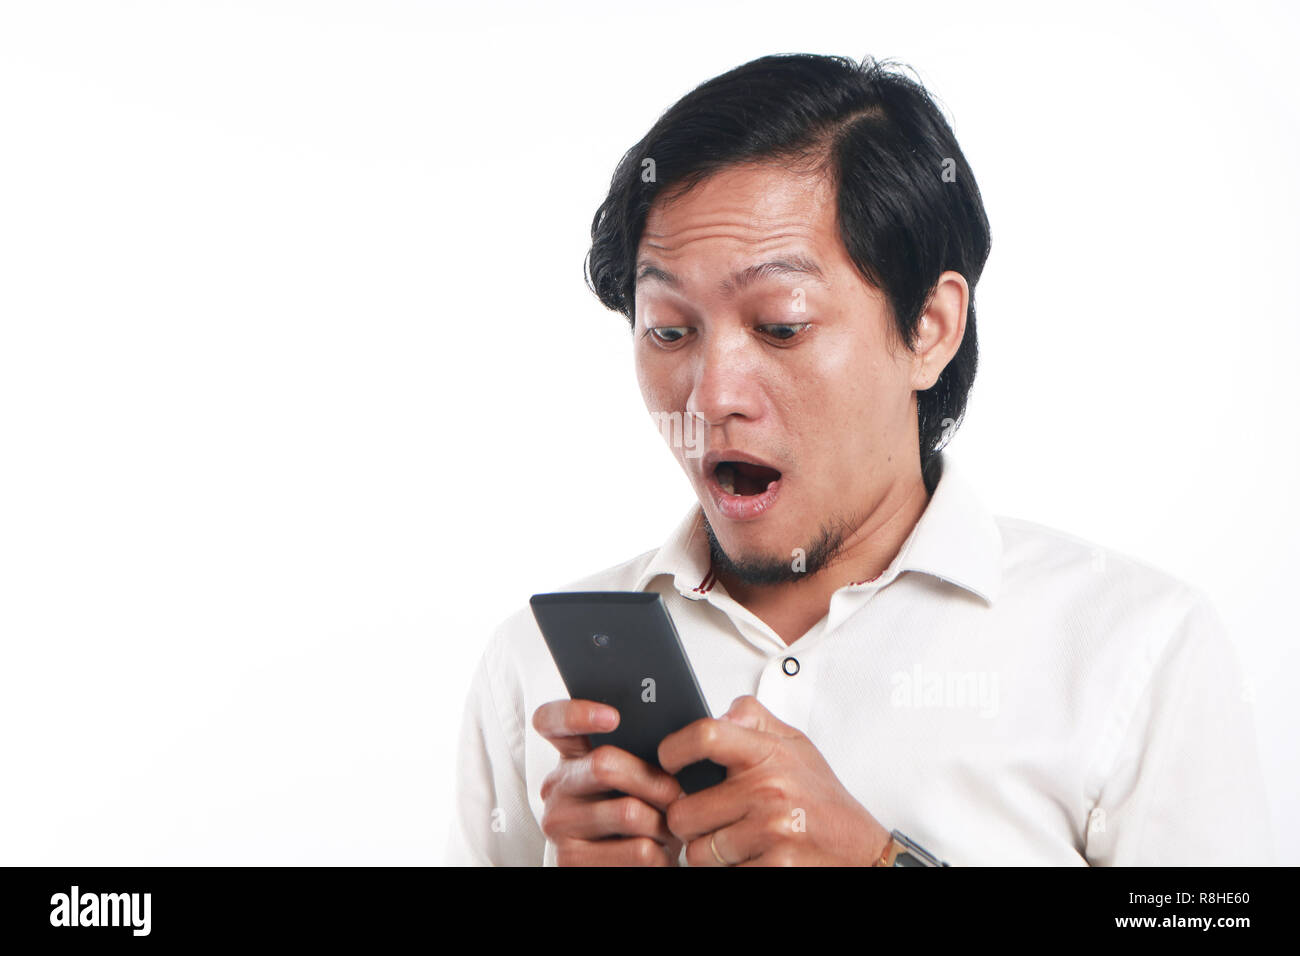 Photo image portrait of a funny young Asian man shocked while looking his smart phone. Holding phone with both hands while reading message on it, over Stock Photo